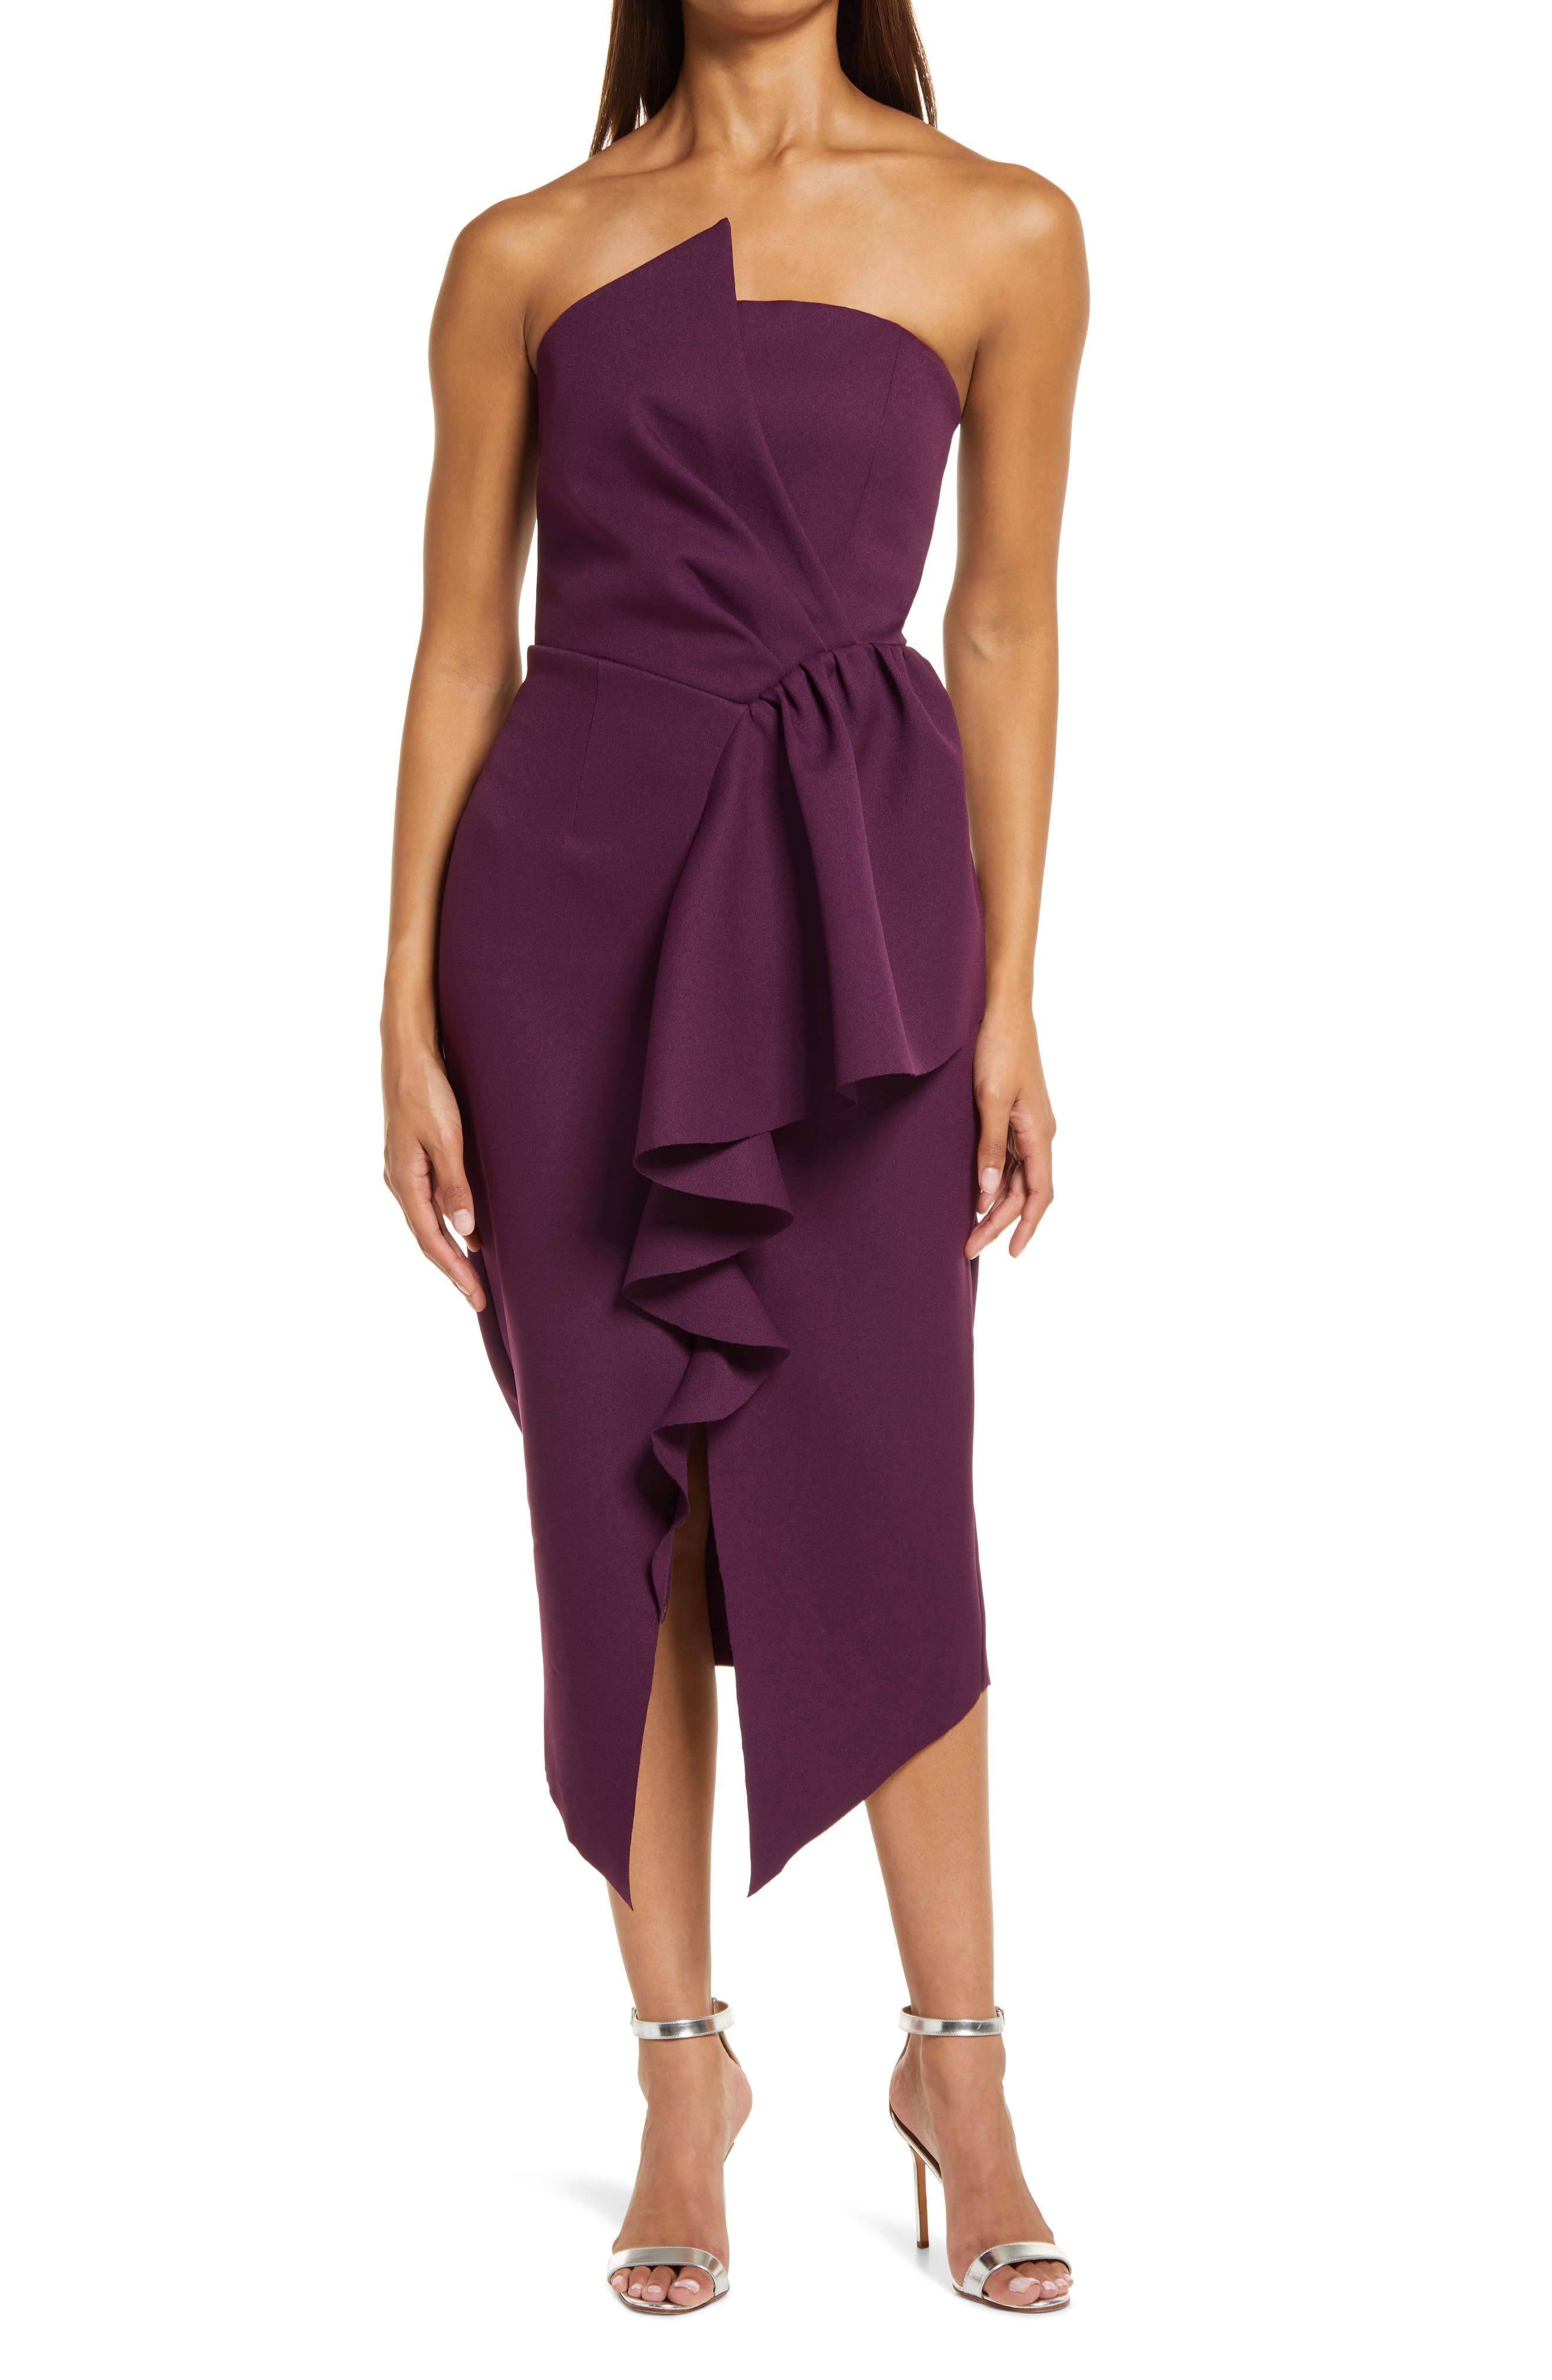 ruffle cocktail dress | Nordstrom